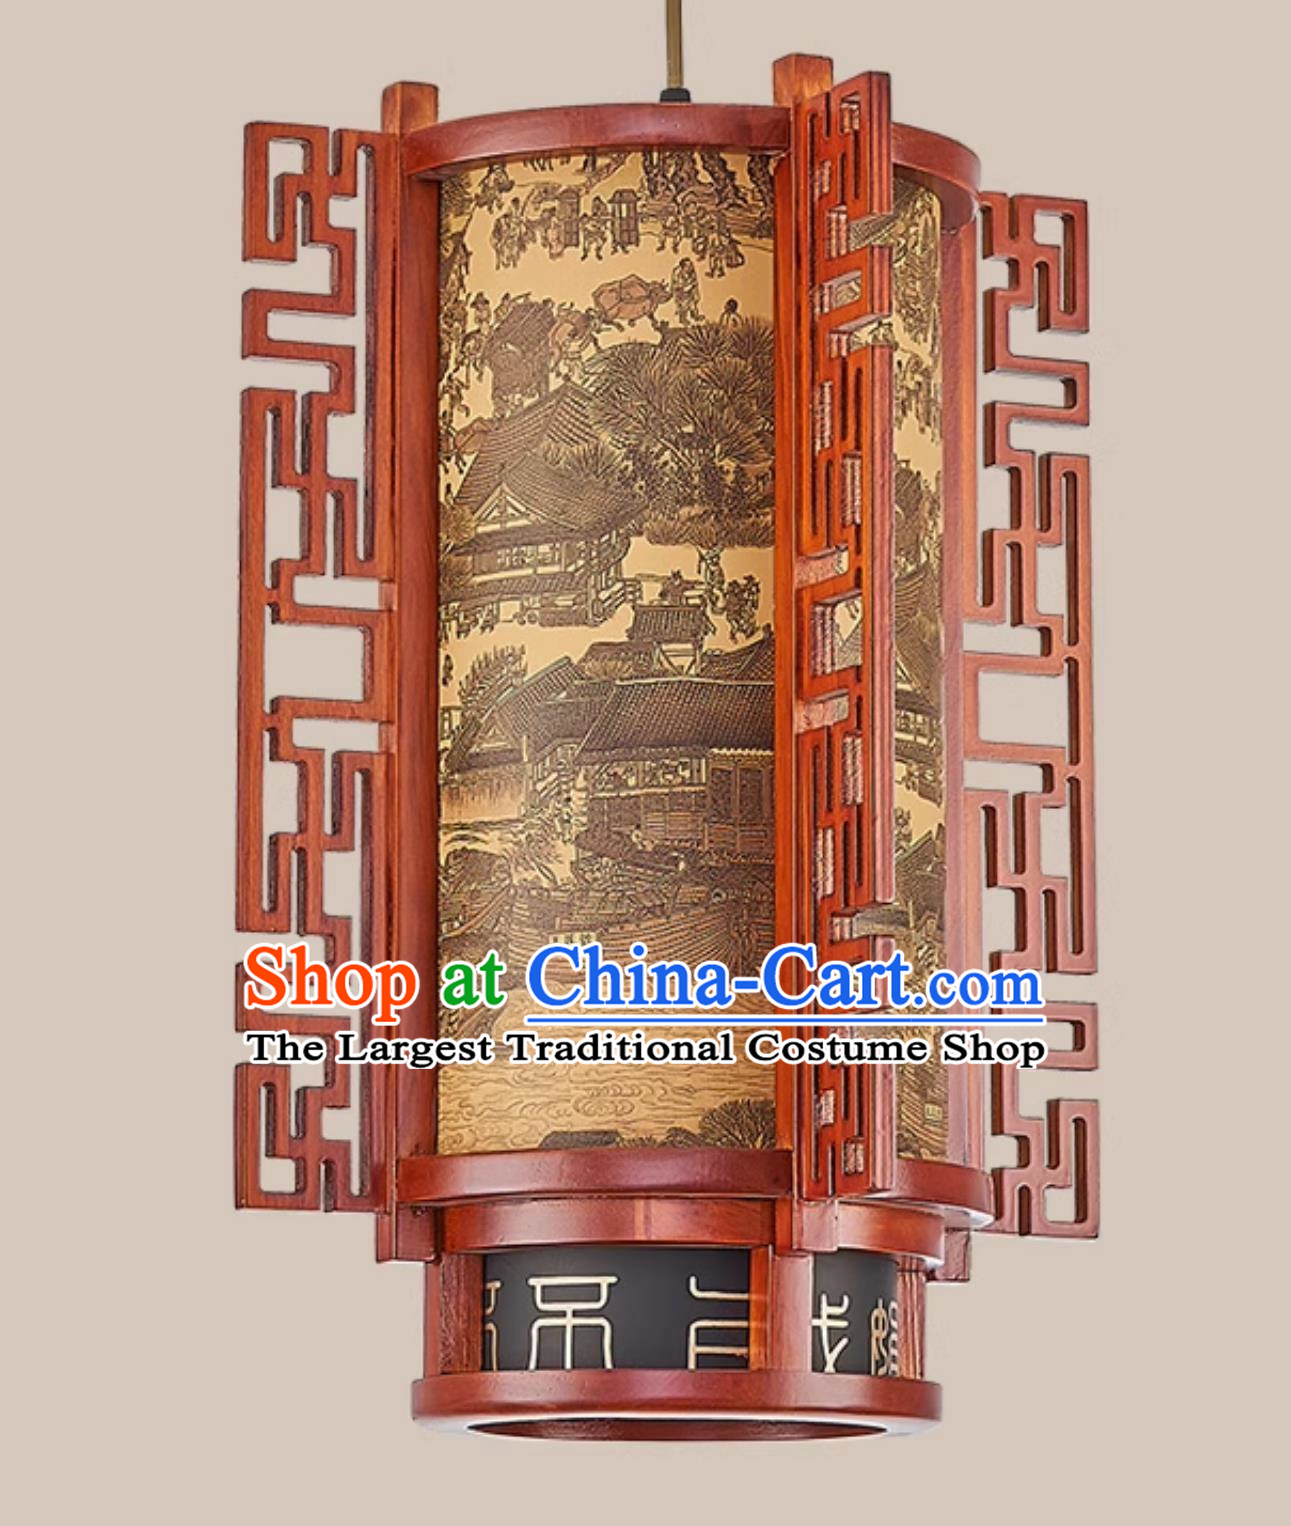 17 Inches High School Style Chandelier Antique Lantern Corridor Solid Wood Lamp